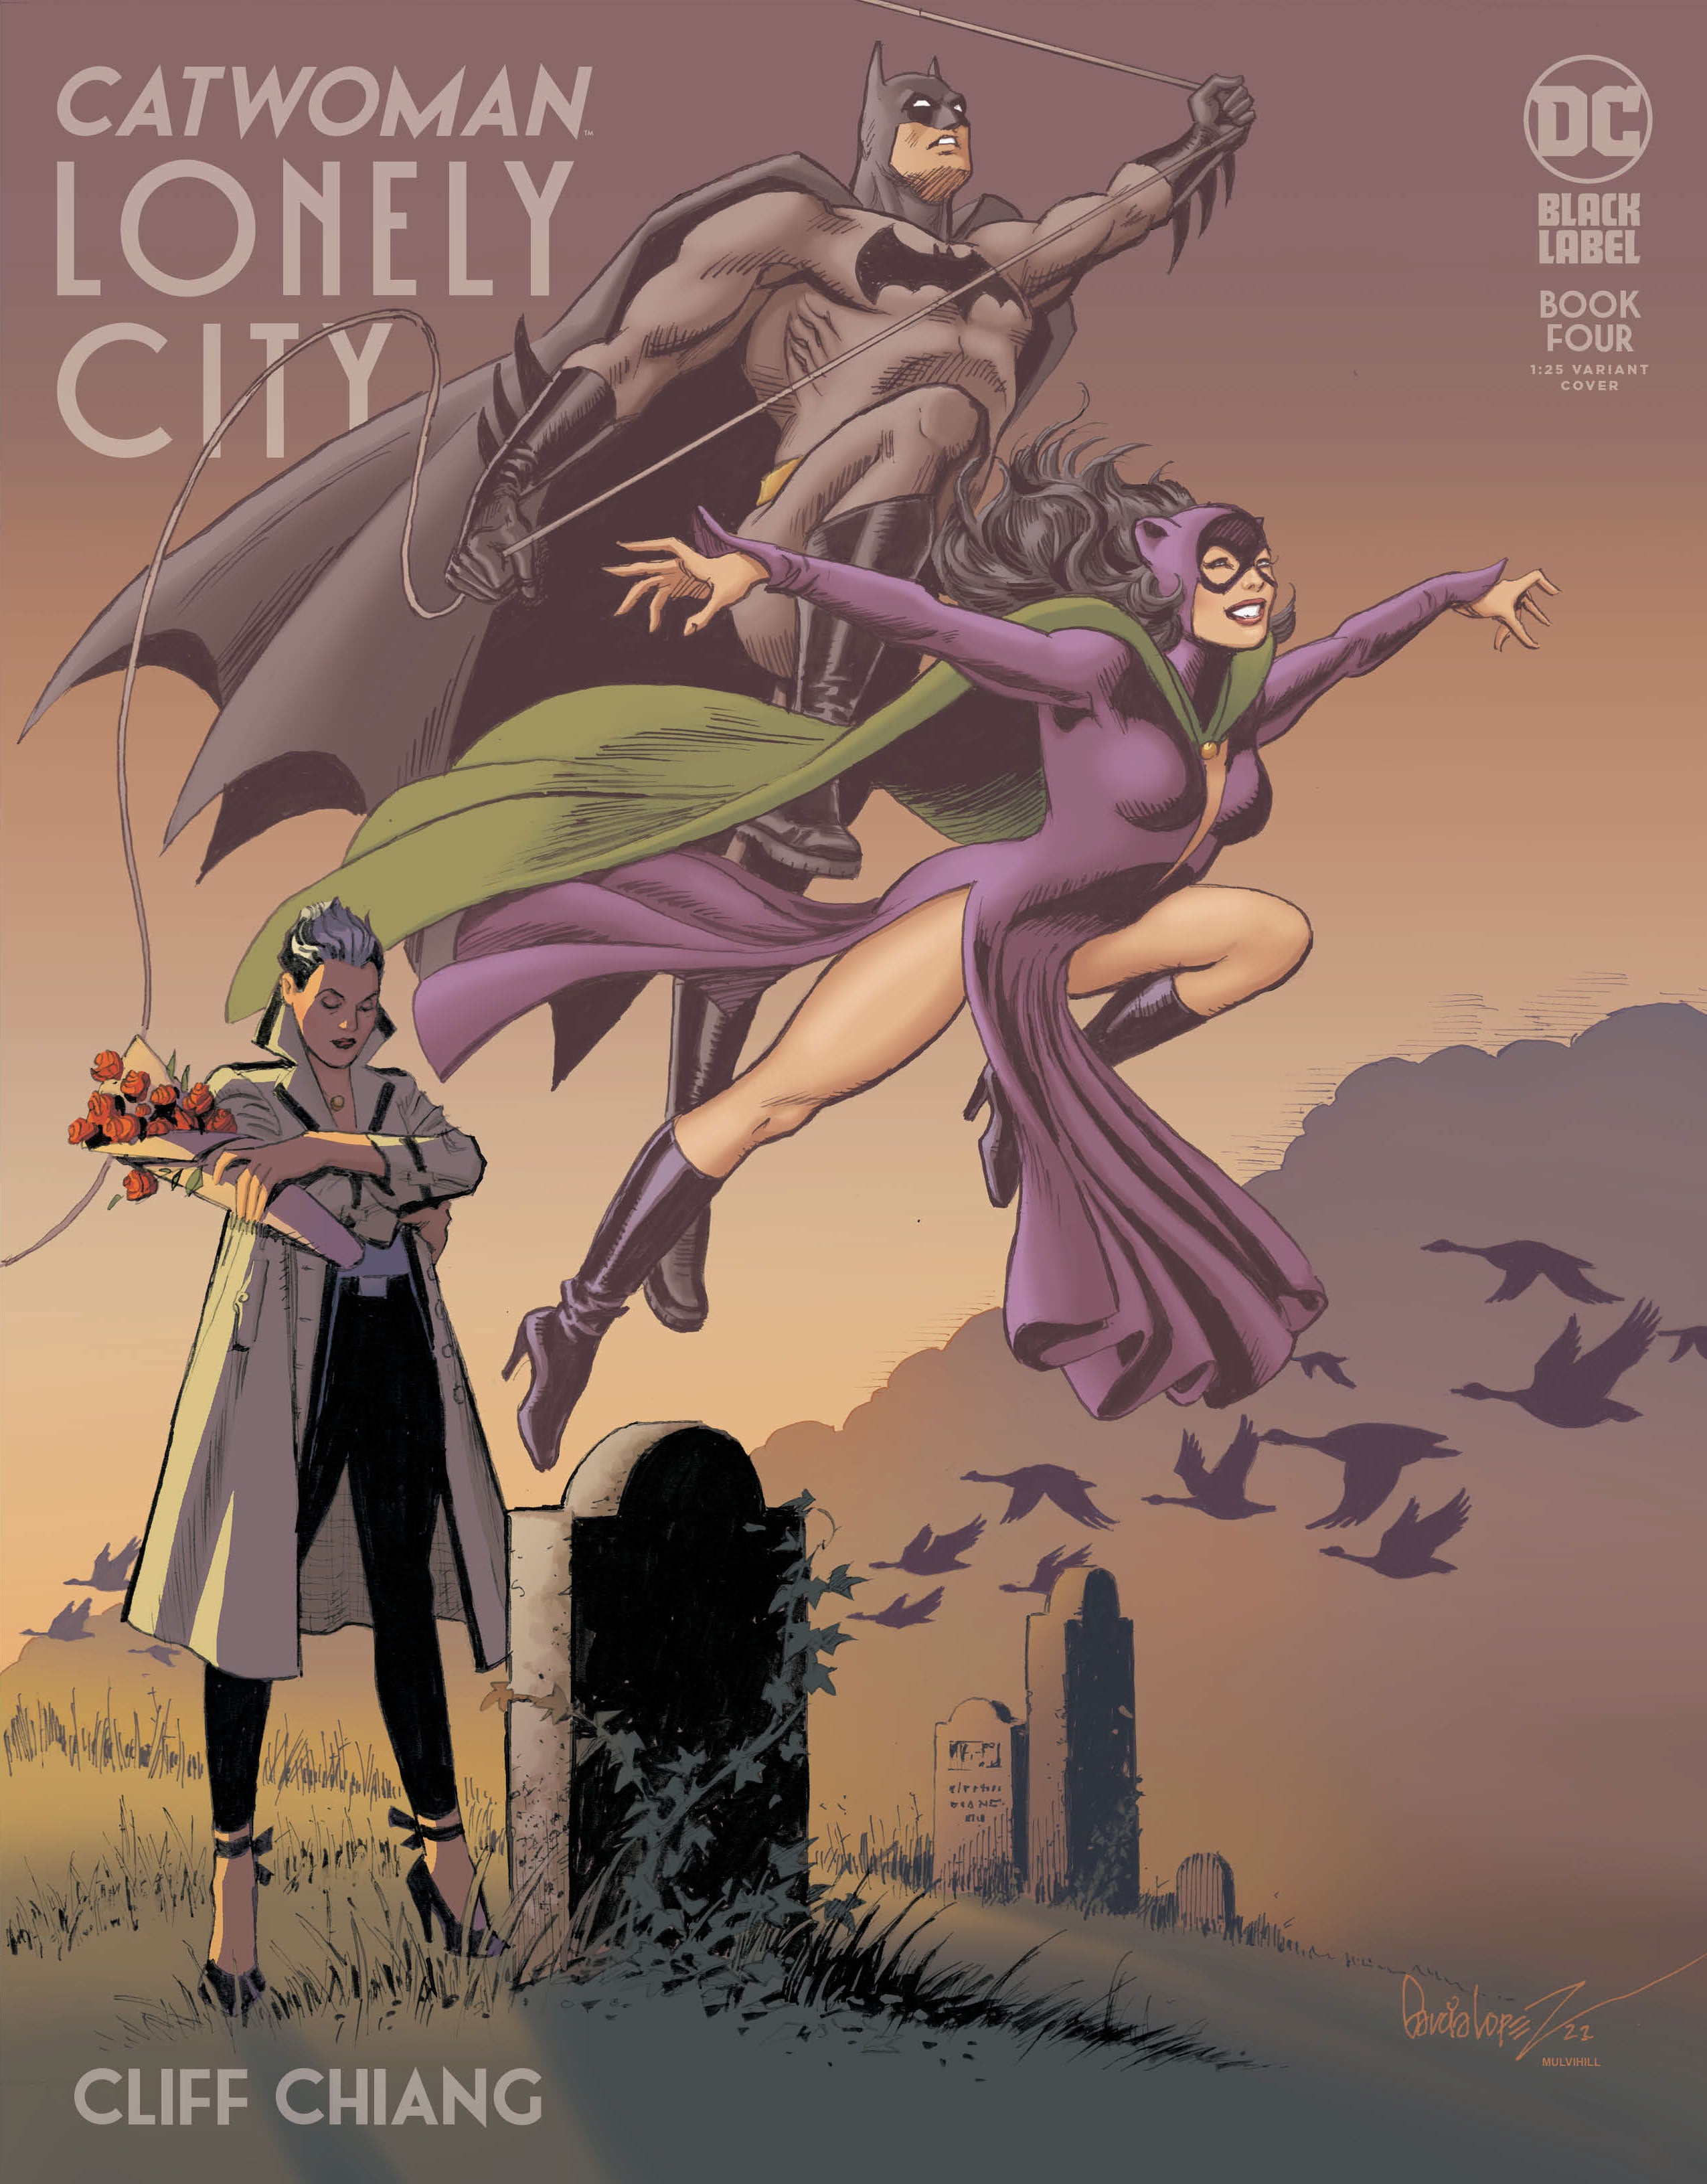 Lonely City 4 cover featuring Catwoman standing at a grave